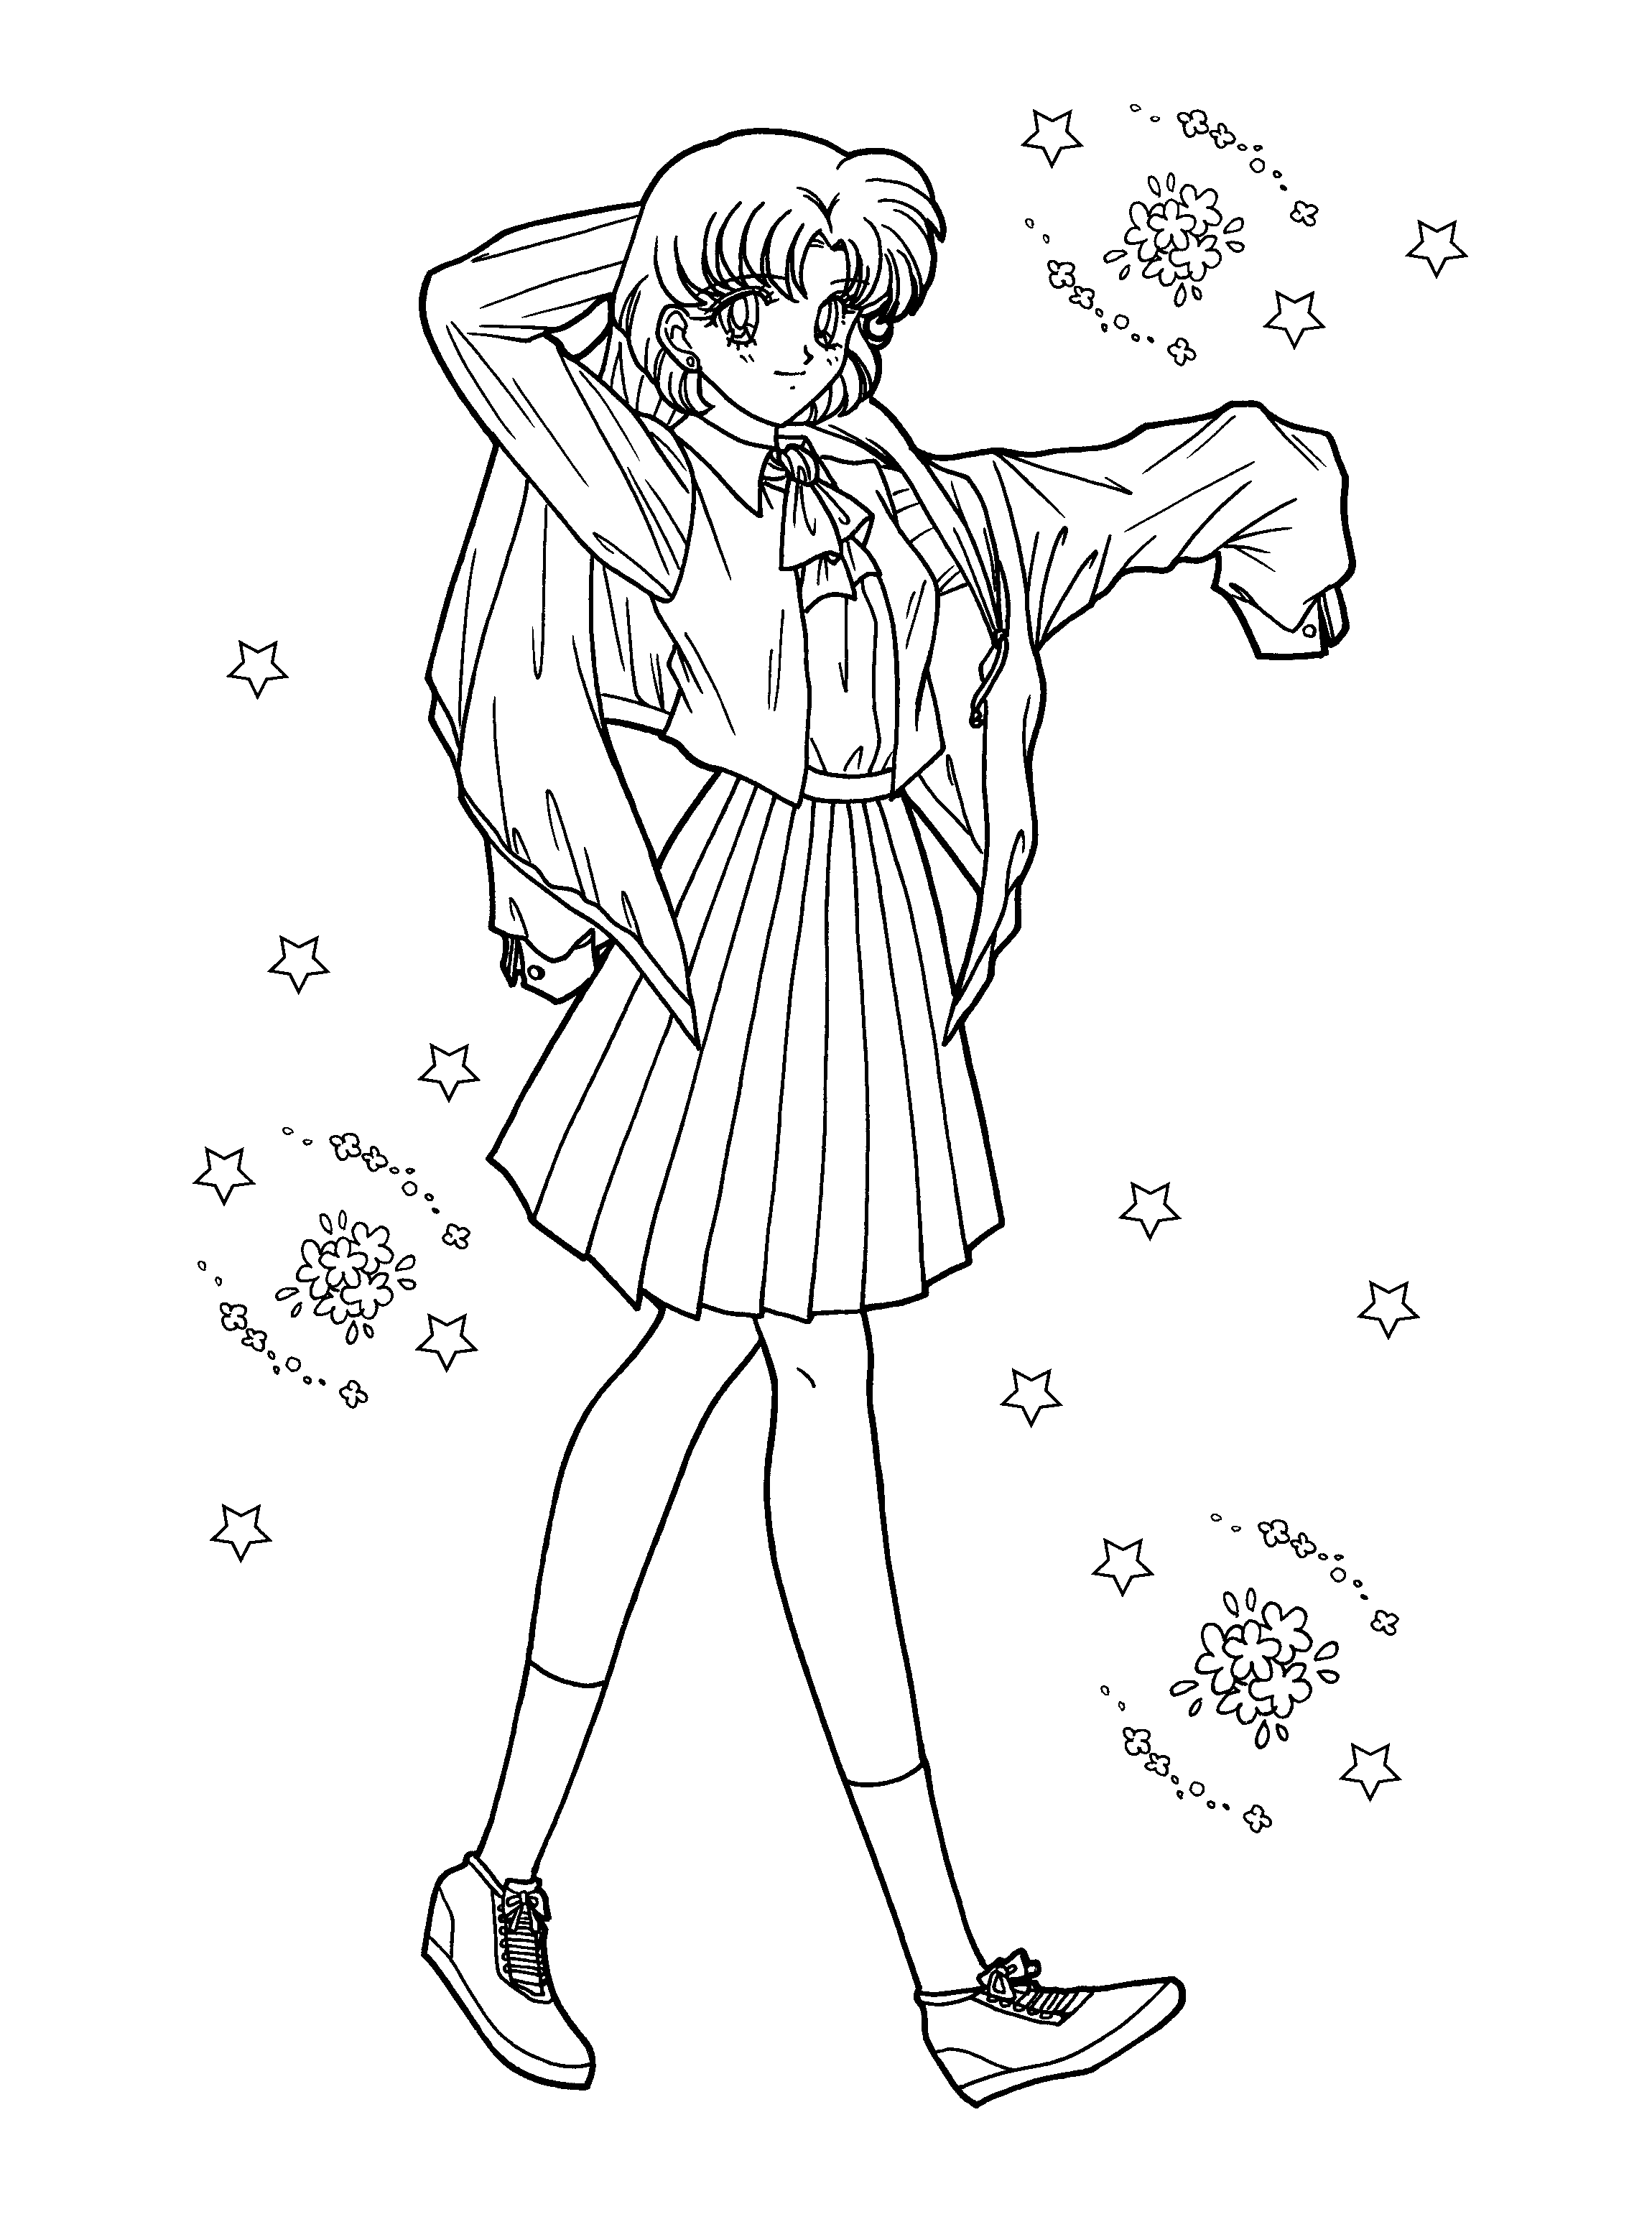 Sailormoon coloring pages